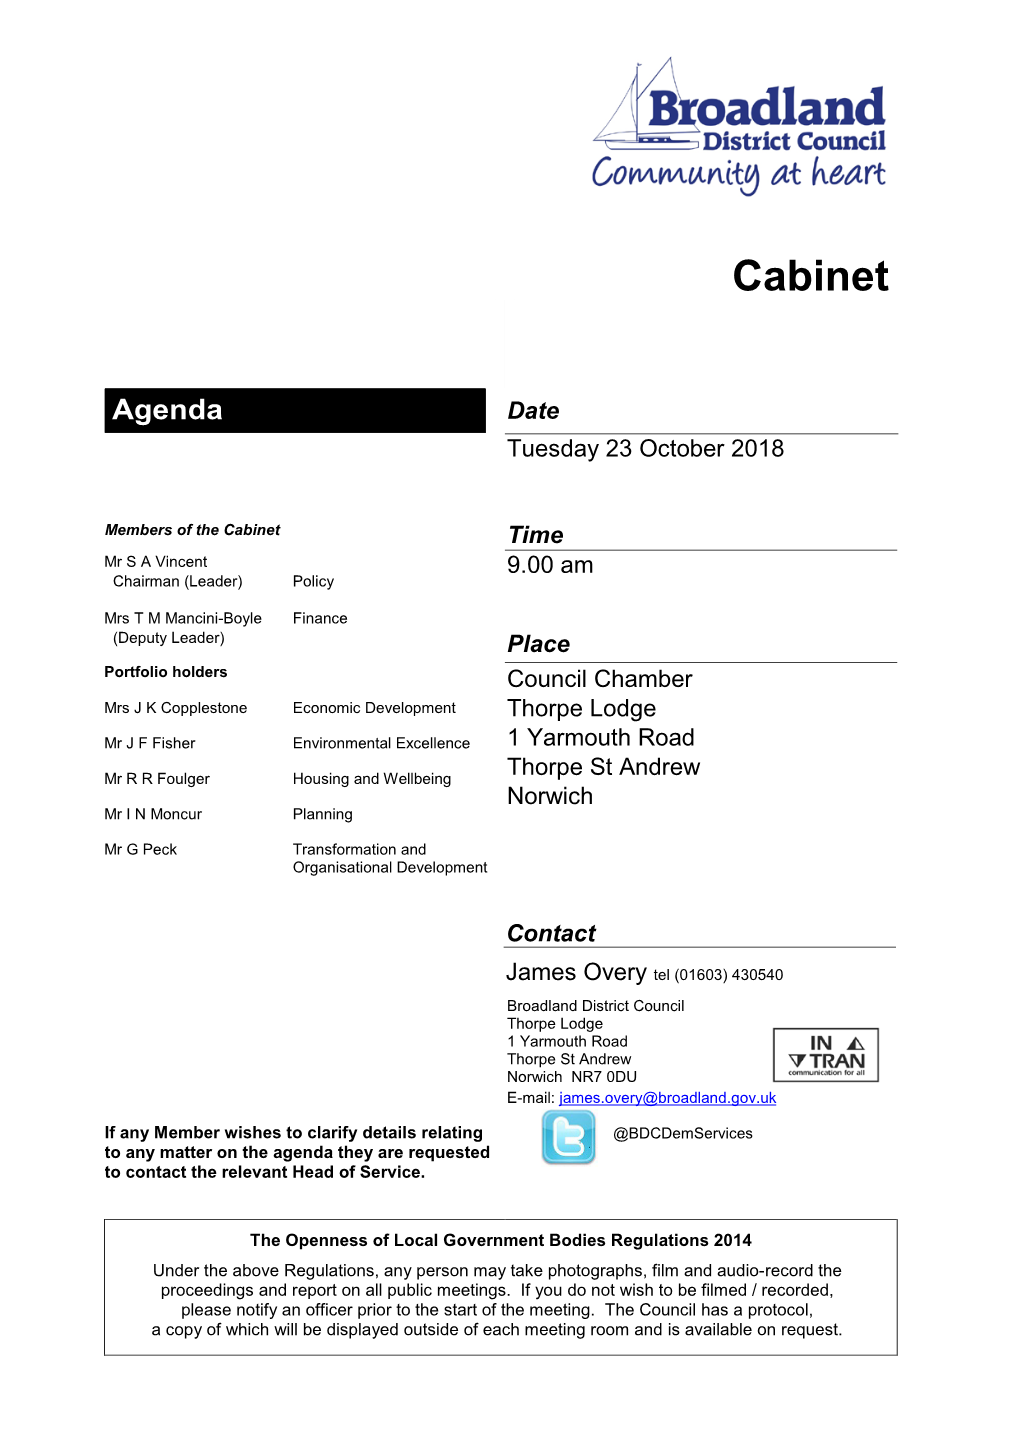 Cabinet Papers